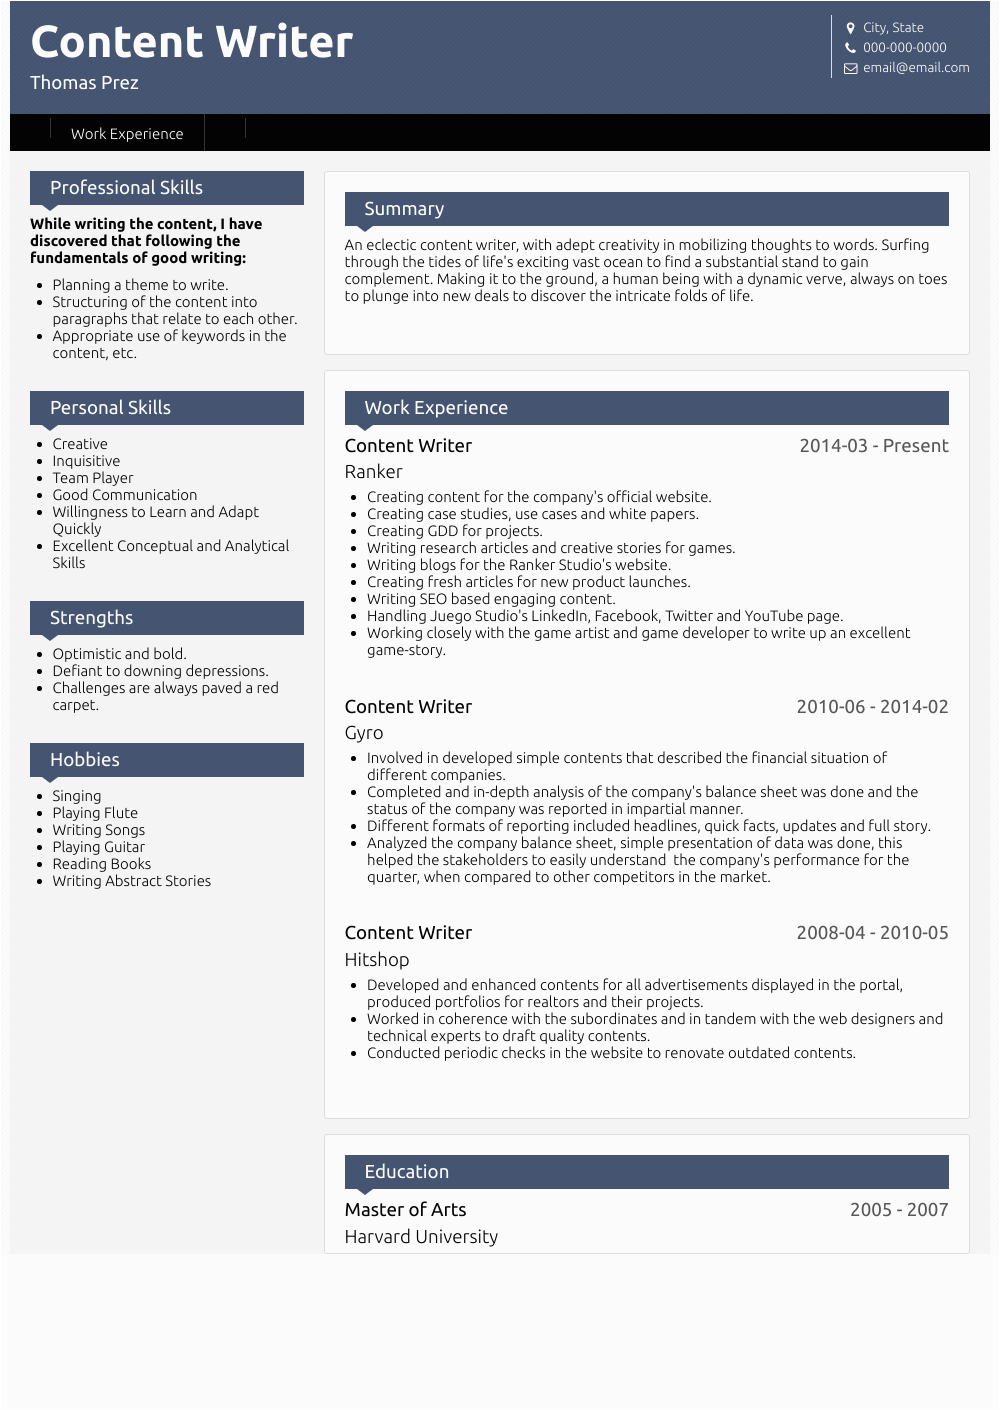 Sample Resume for Content Writer Fresher Free Resume Samples for Freshers Best Resume Examples